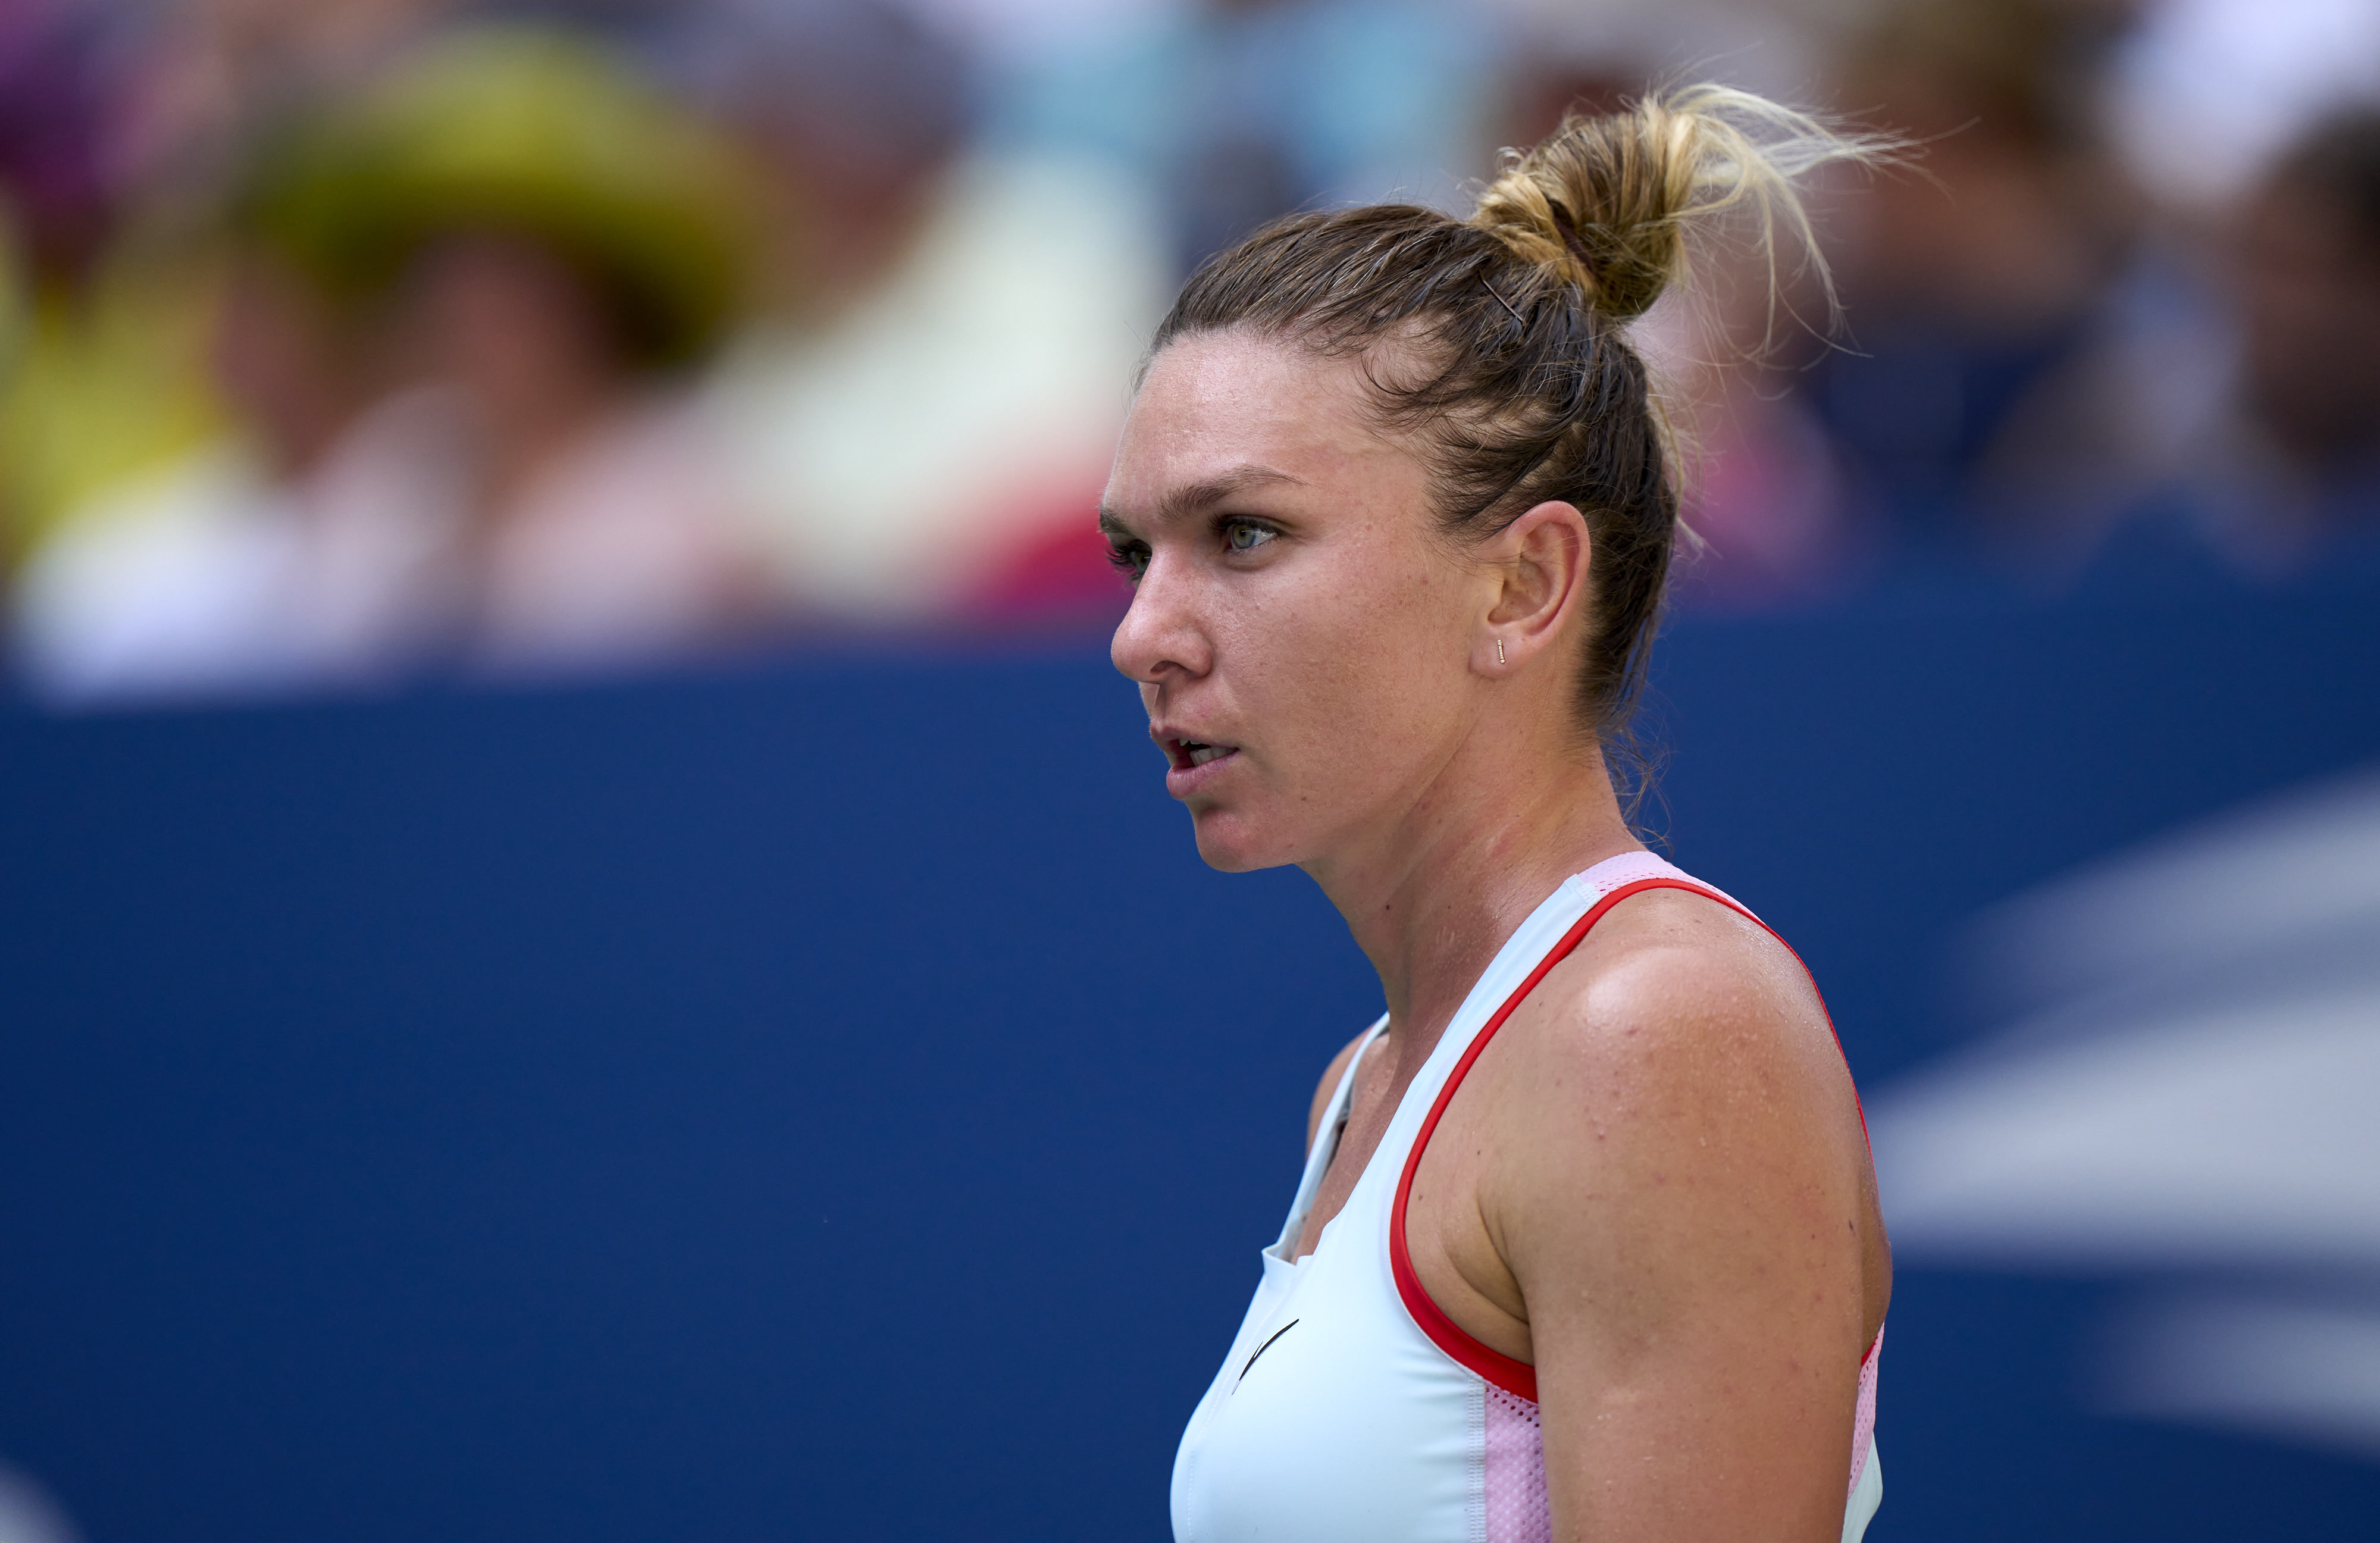 Simona Halep maintains innocence after being hit with second, additional doping violation